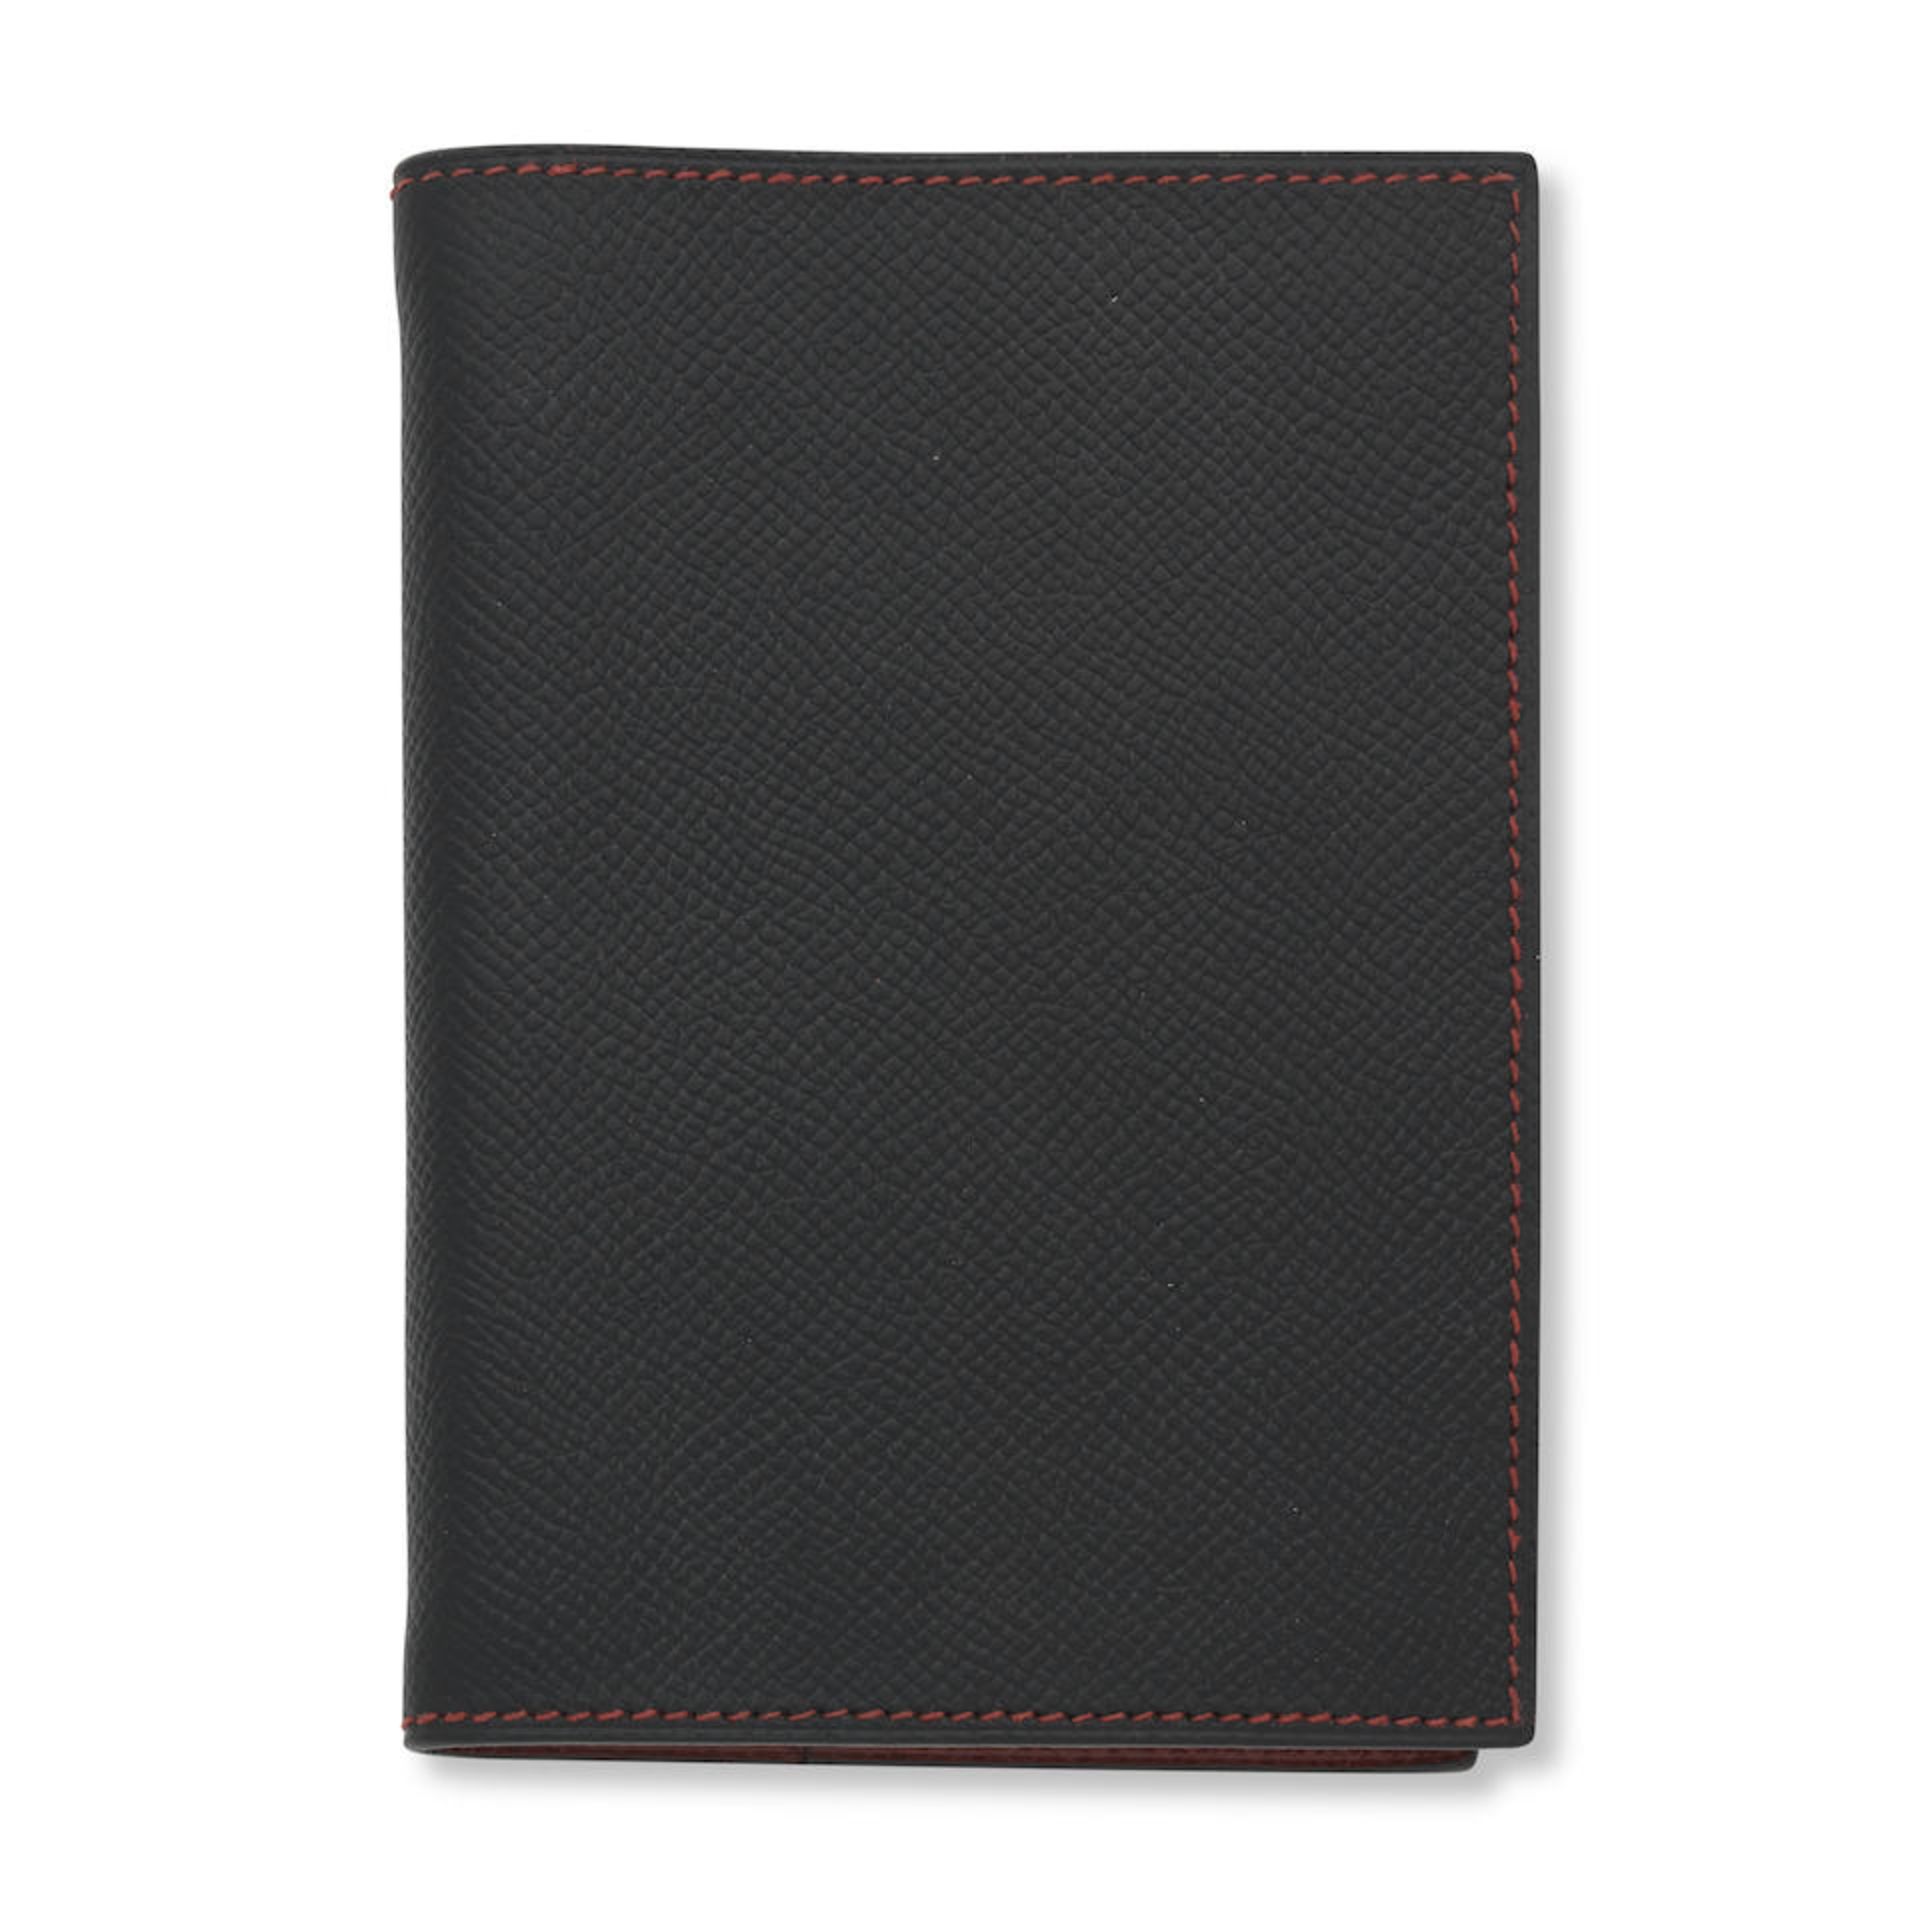 Hermès: a Black and Rouge H Epsom Index Cover